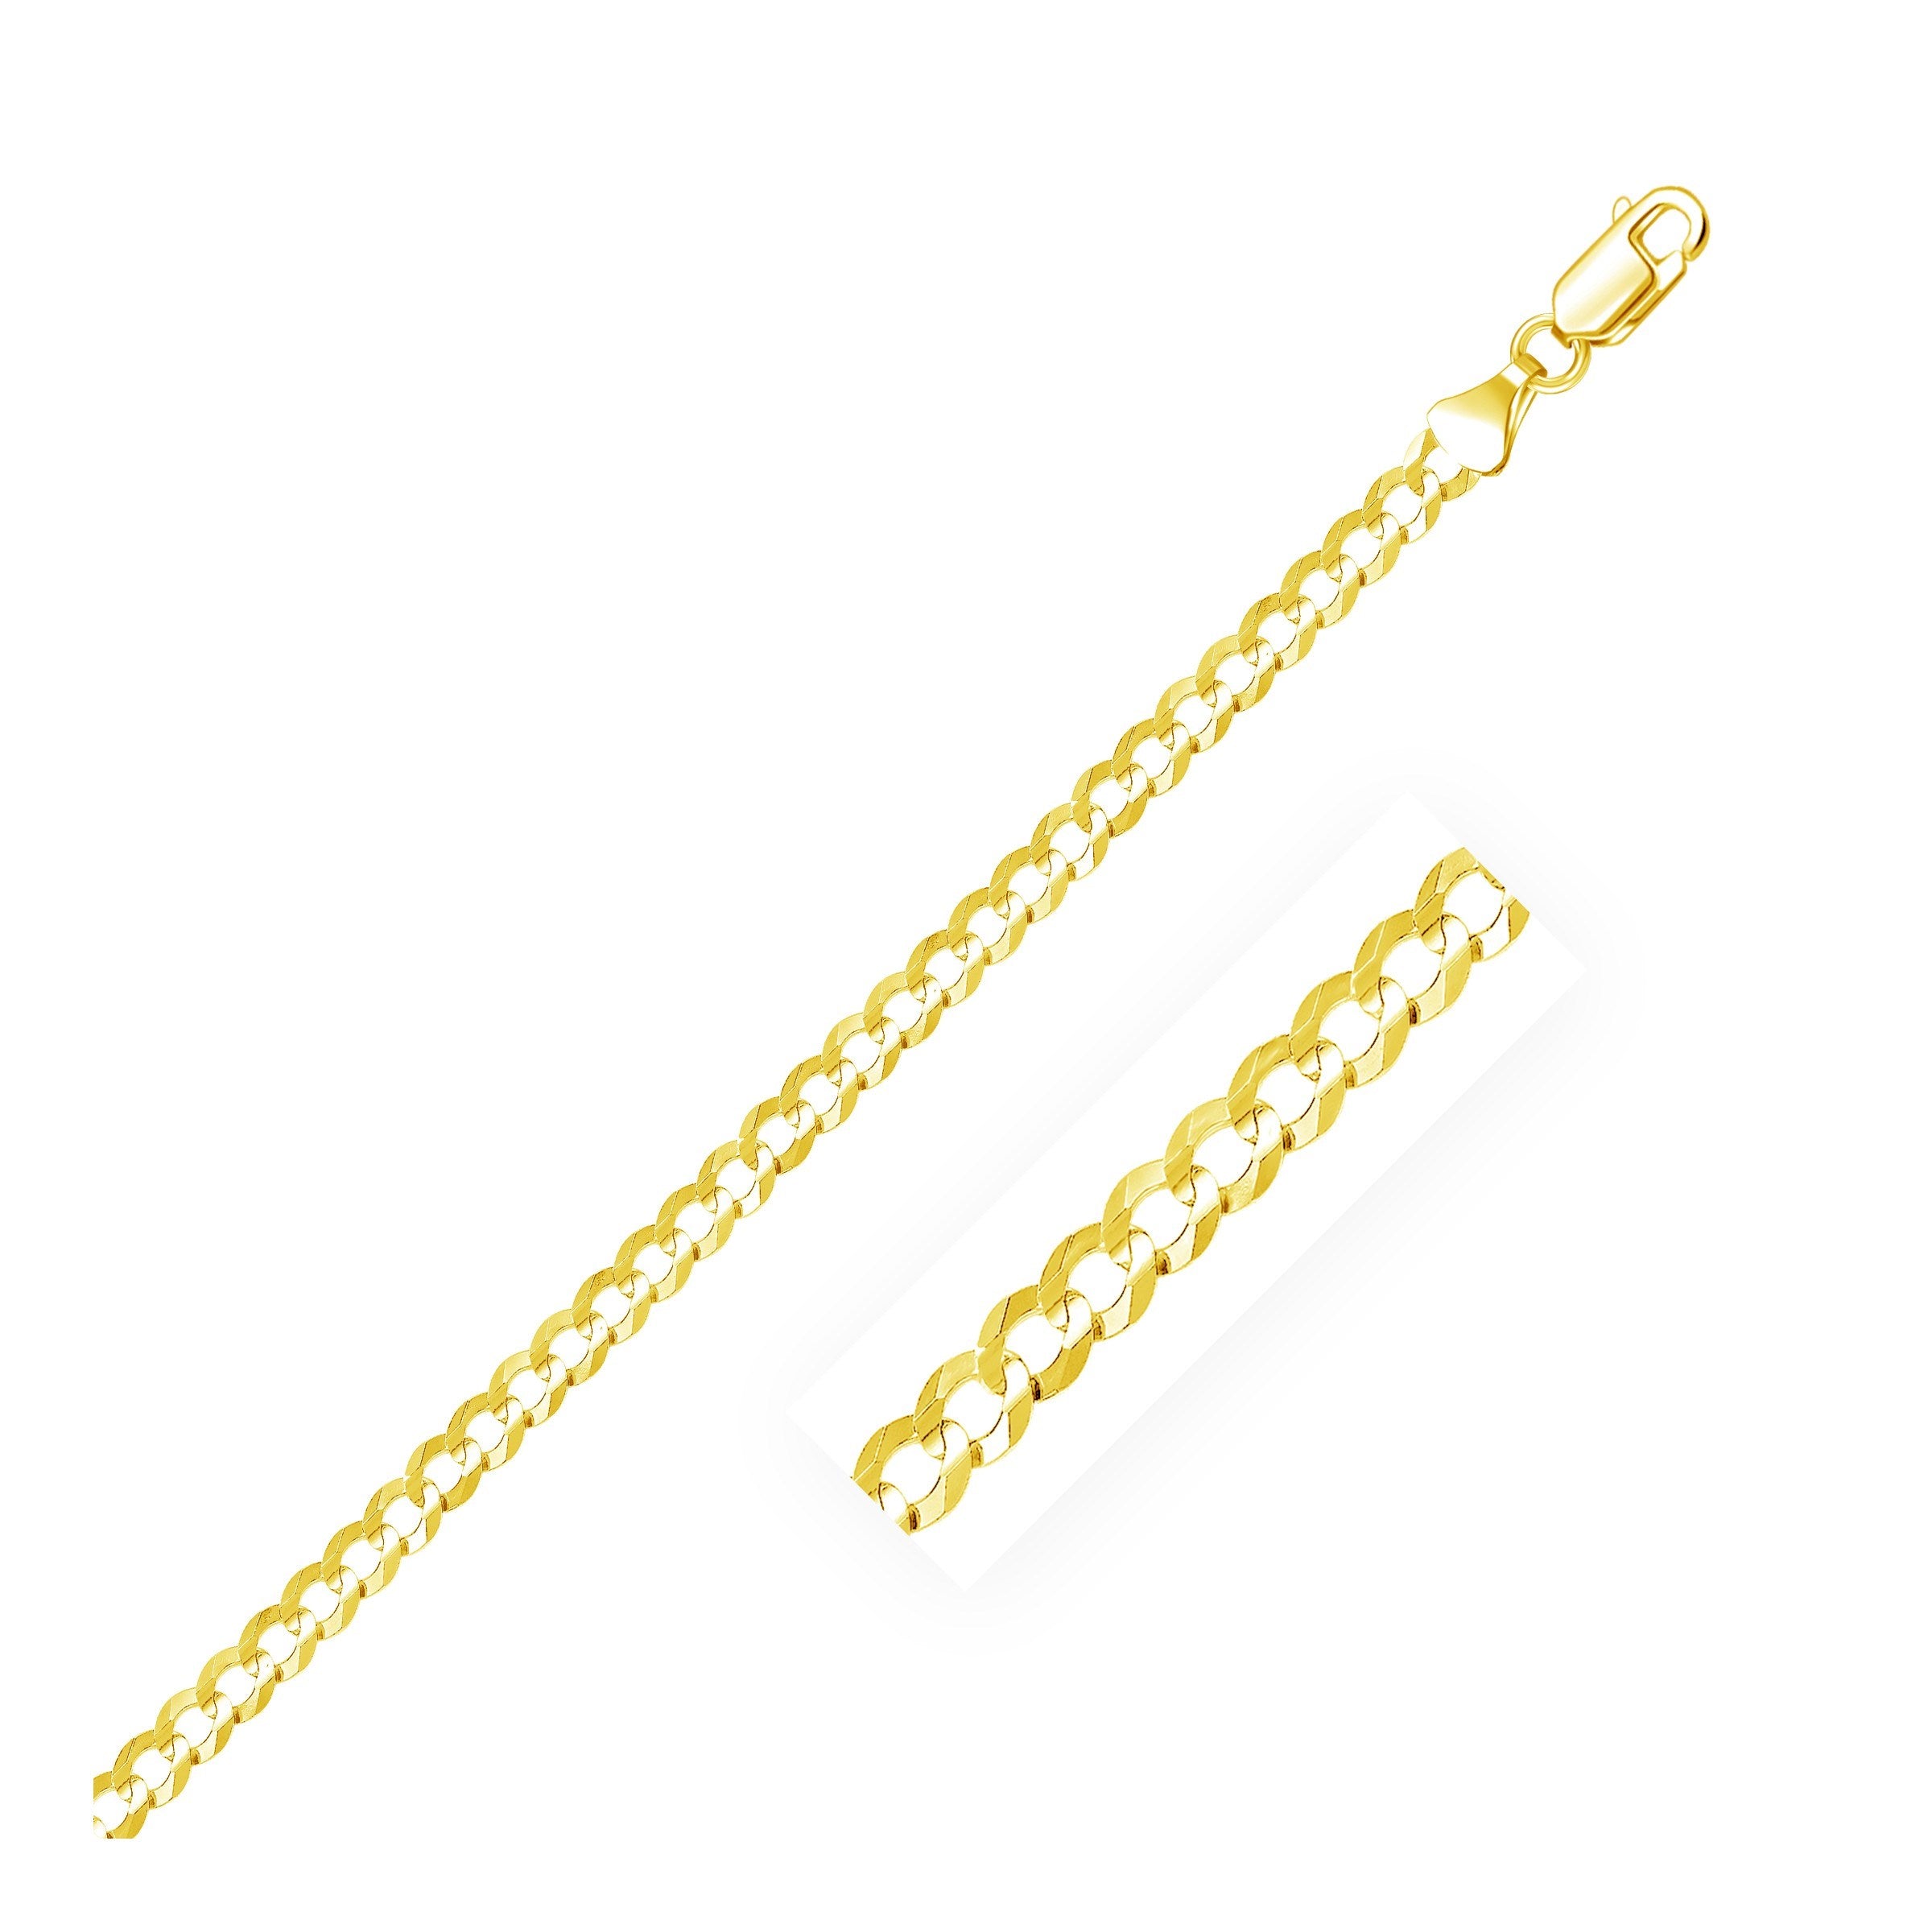 4.7mm 14k Yellow Gold Solid Curb Bracelet